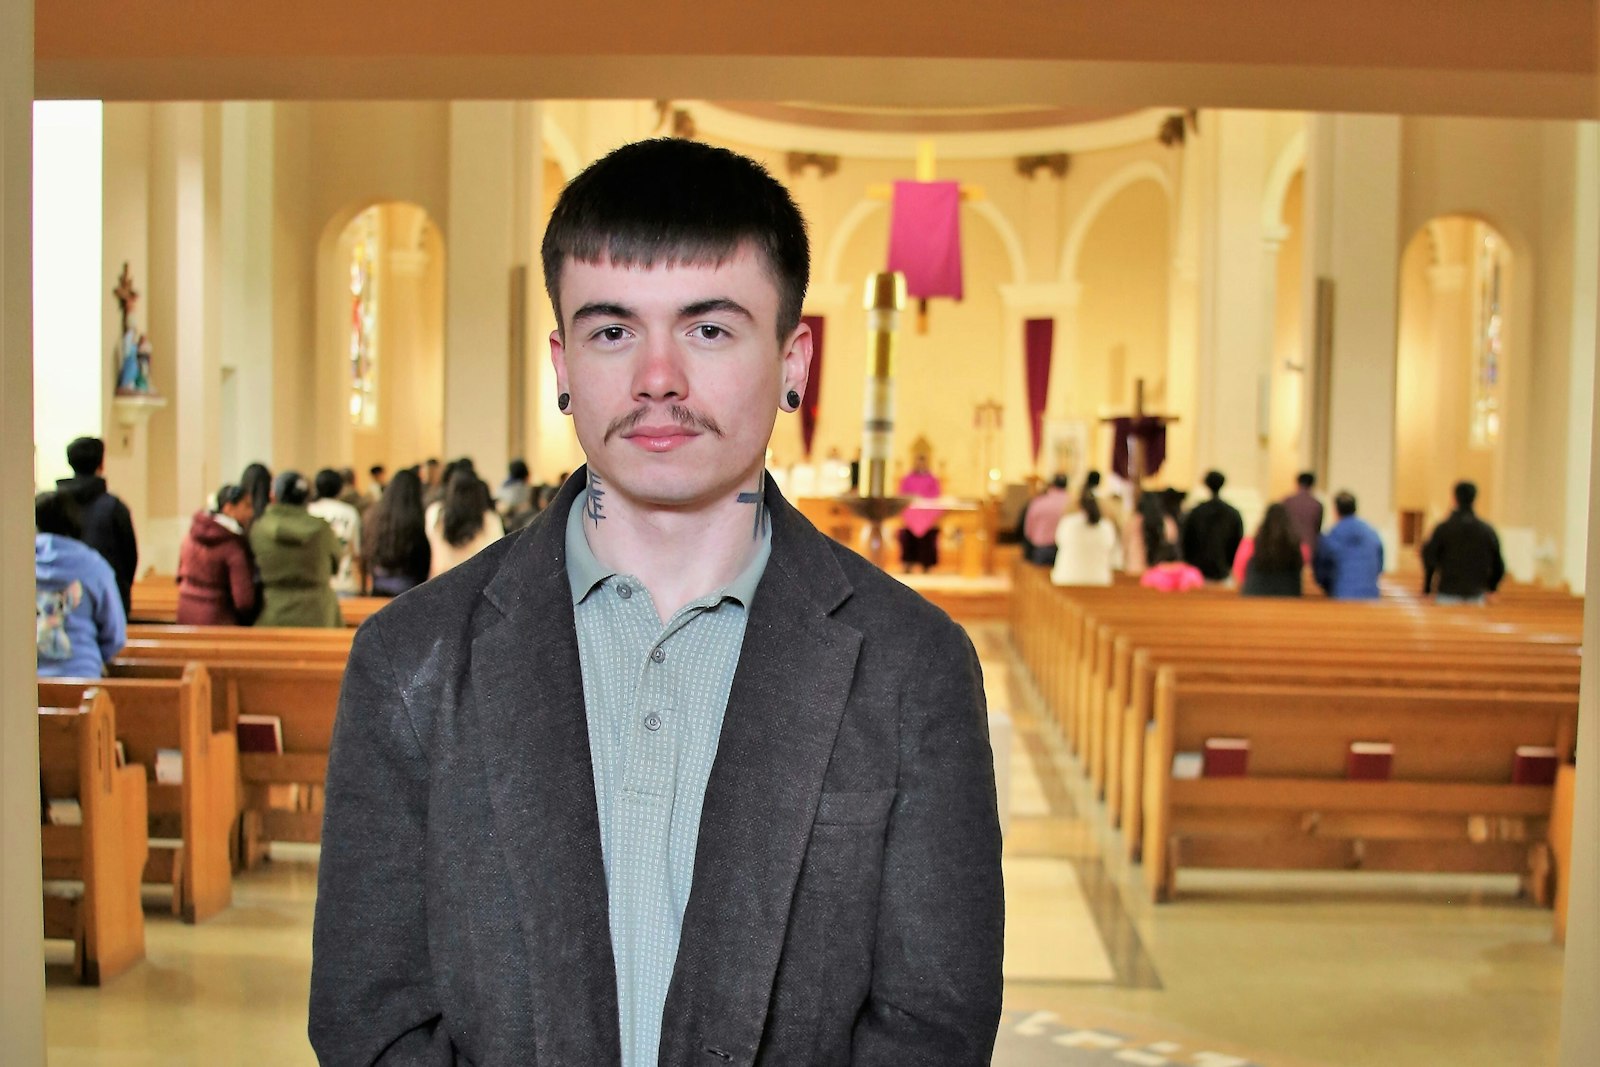 Despite his mistakes, Trent says the community at St. Mary of the Immaculate Conception Parish in Monroe has welcomed him with open arms, including Fr. David Burgard, who is working with Trent as he finishes his OCIA formation. “I’ve never met a group of people more accepting and loving," he said. "It’s truly Christ’s Church, and it possesses so much power.”